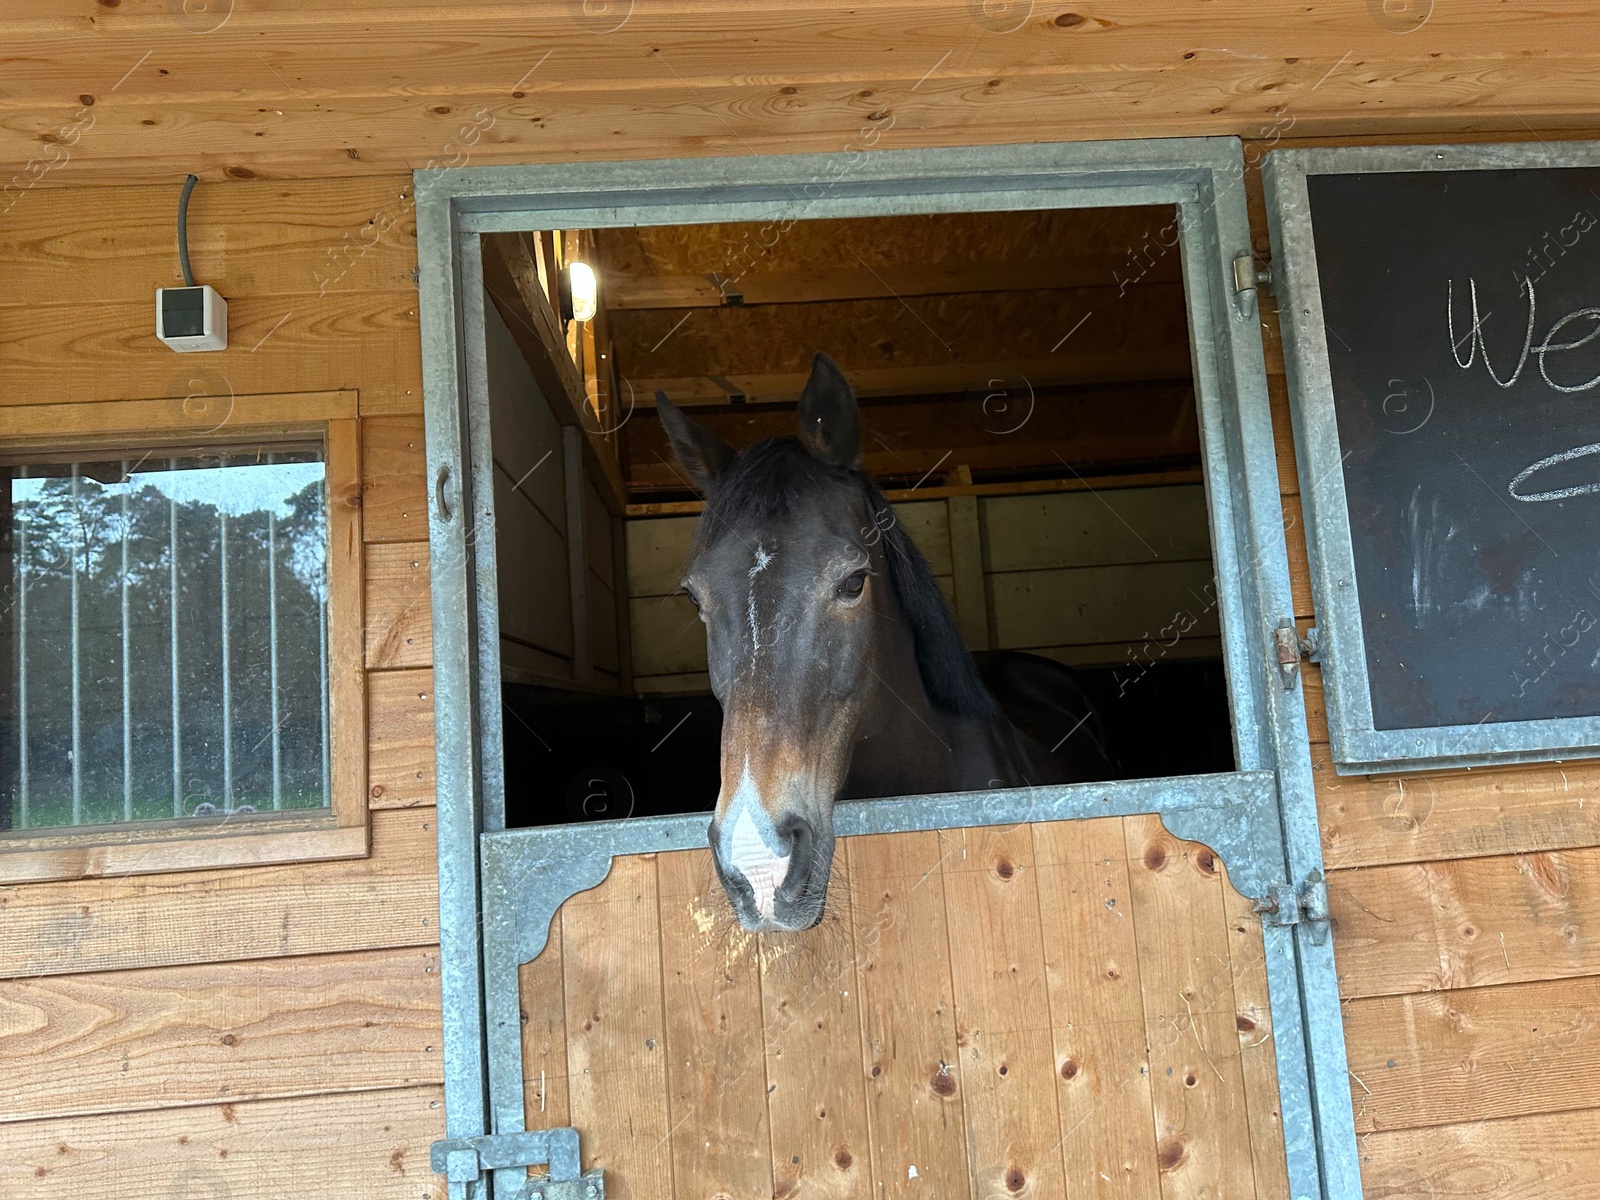 Photo of Adorable horse in stable. Lovely domesticated animal